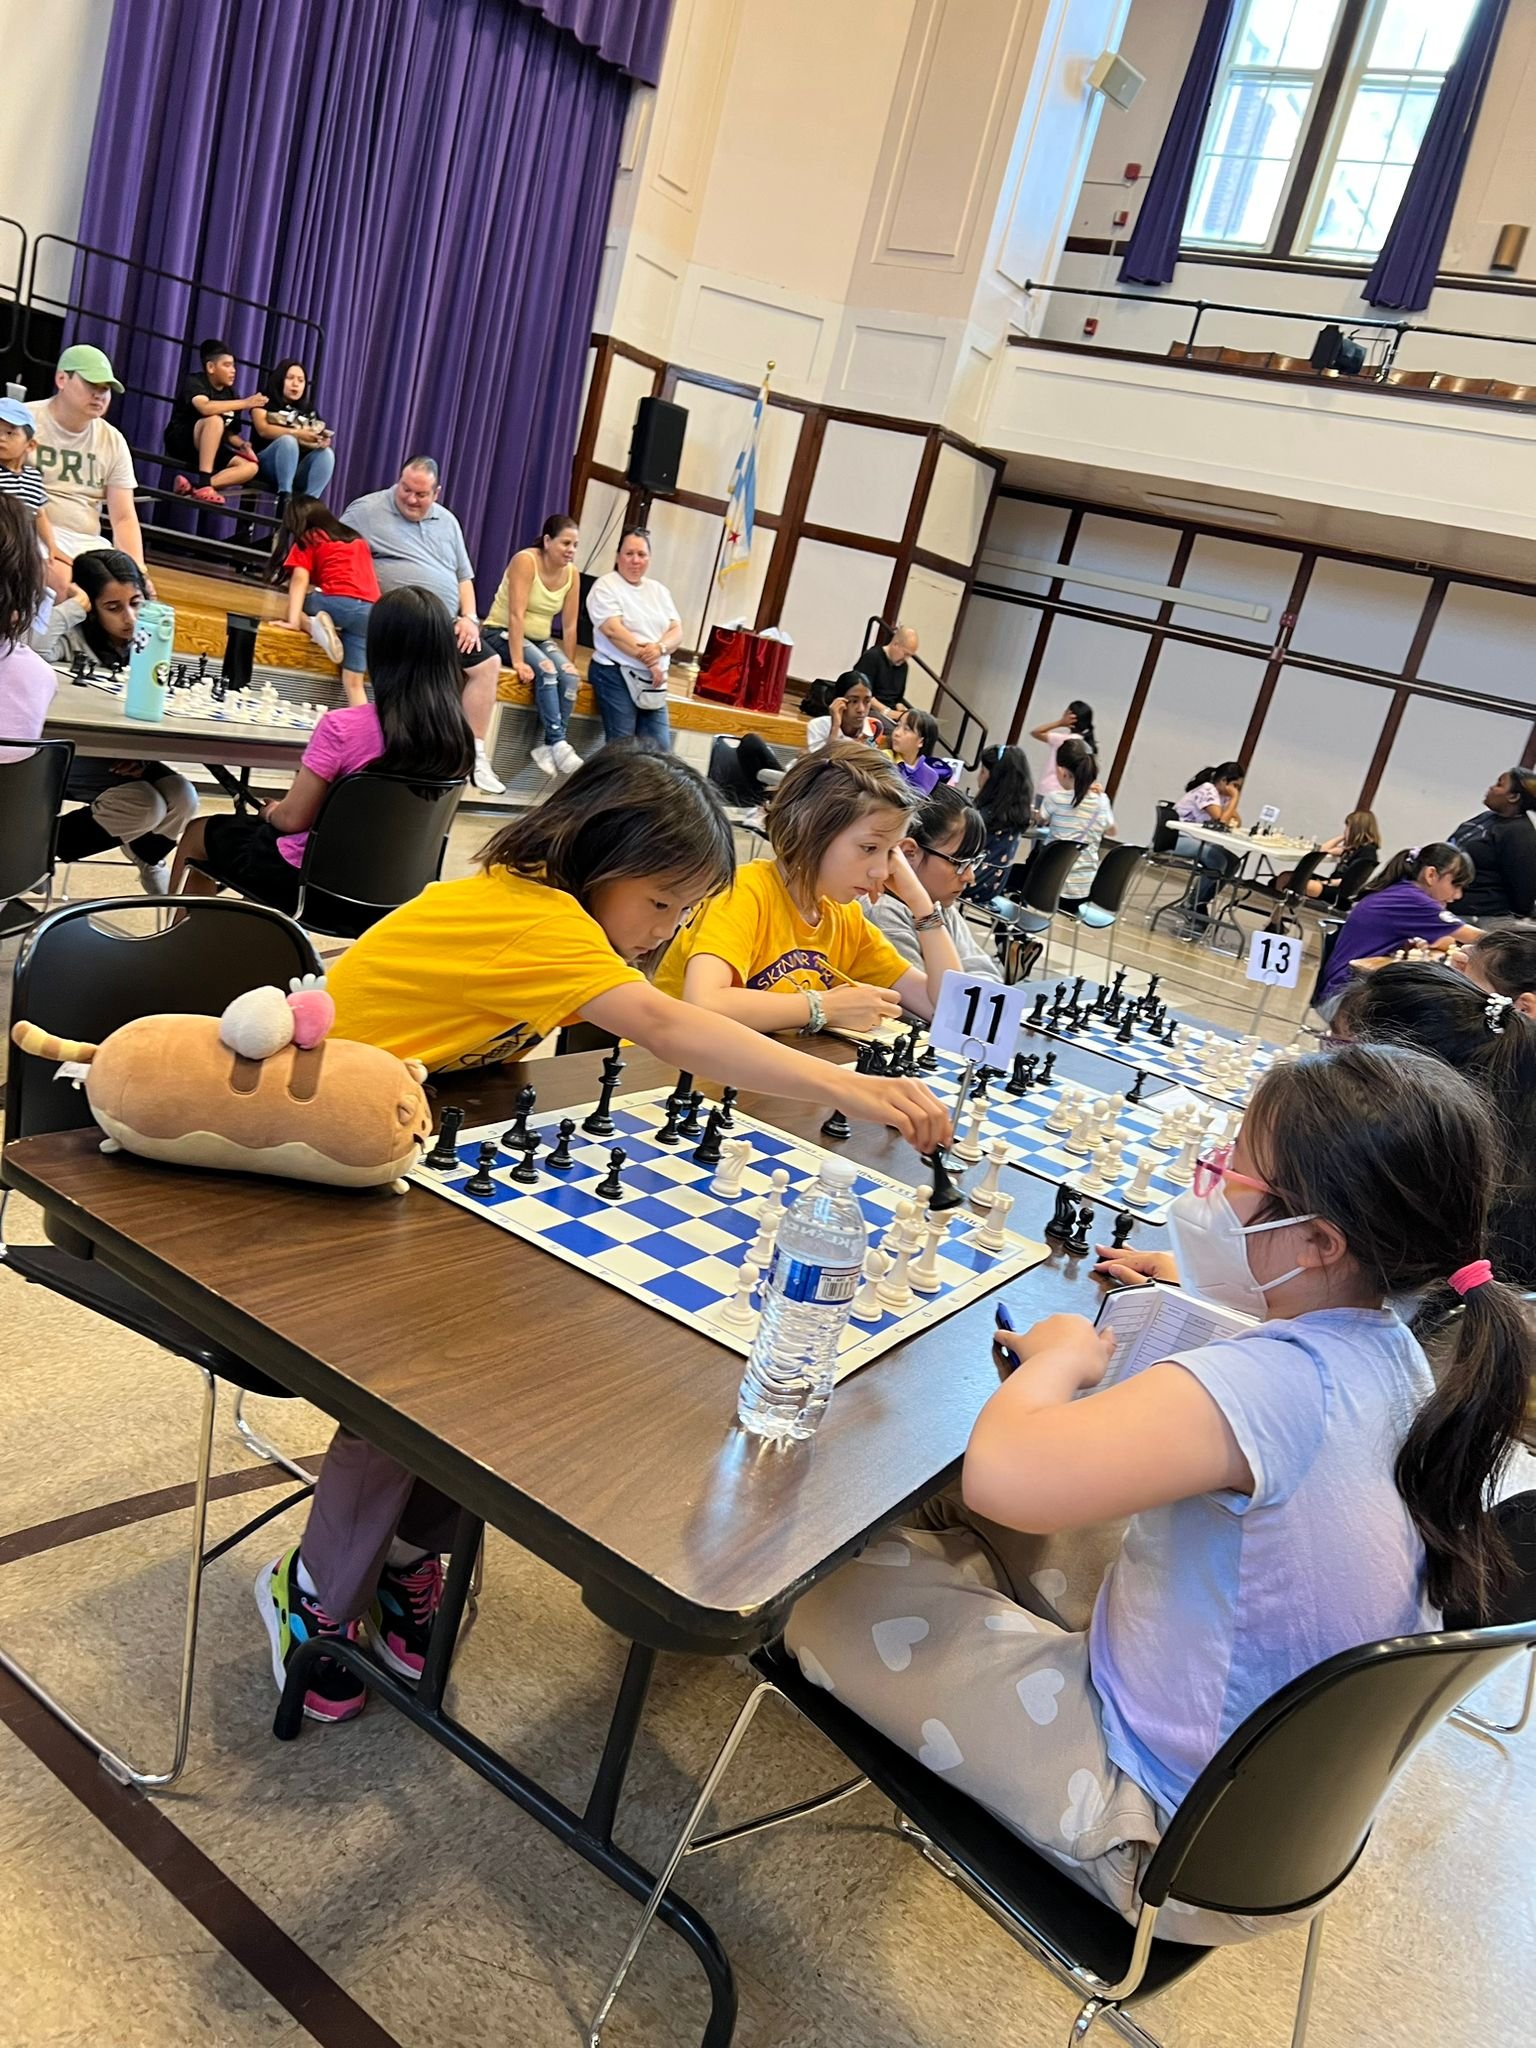 CPS student is youngest chess master in Chicago